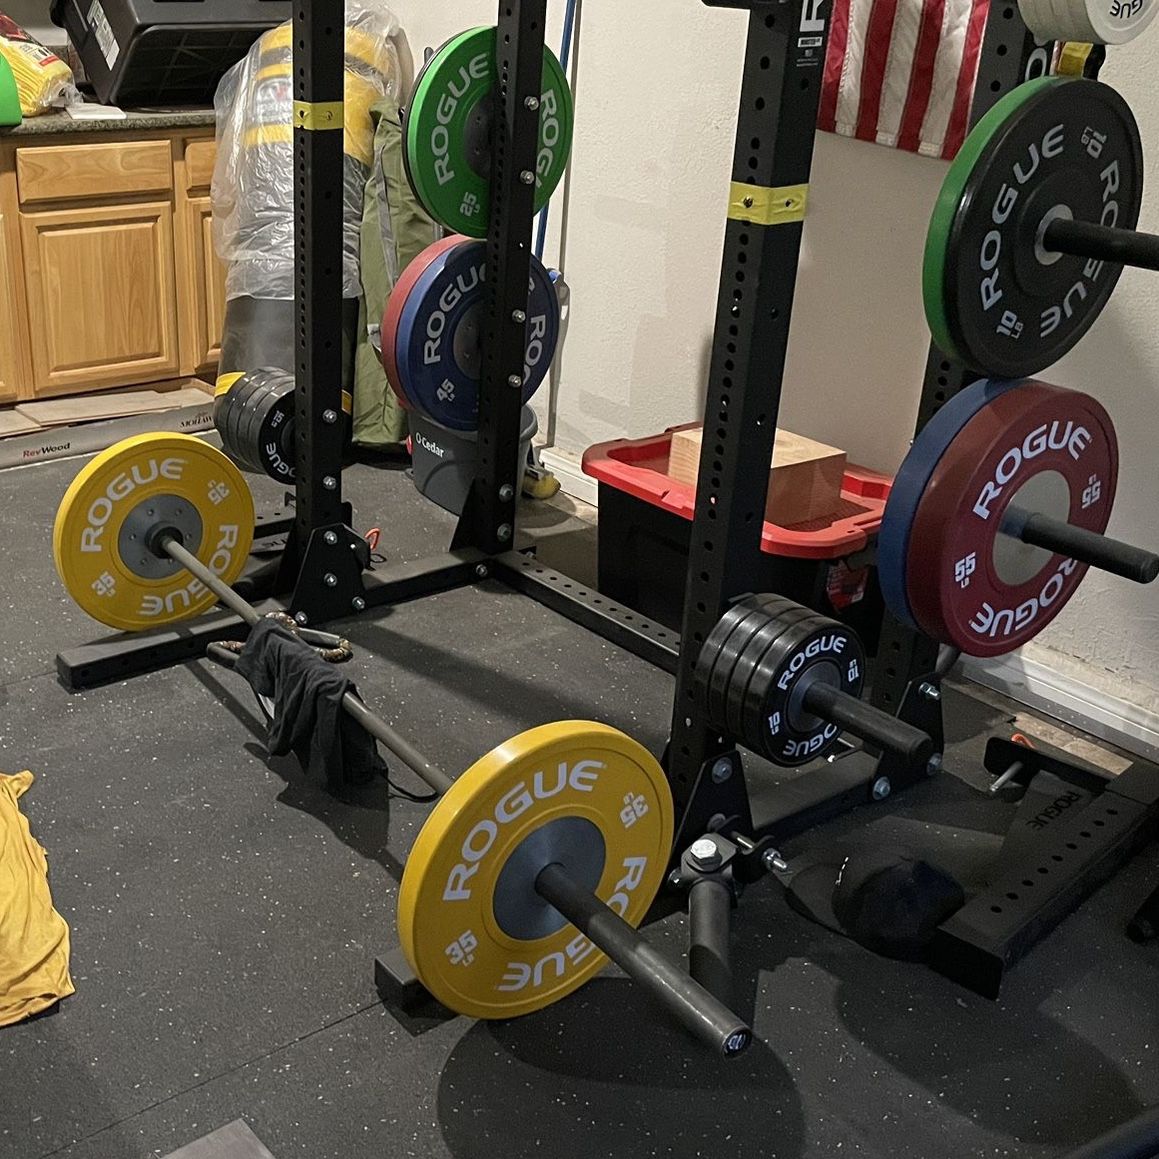 Rogue Fitness HR-2 Lifting / Squat Rack and Accessories for in Whittier, CA - OfferUp